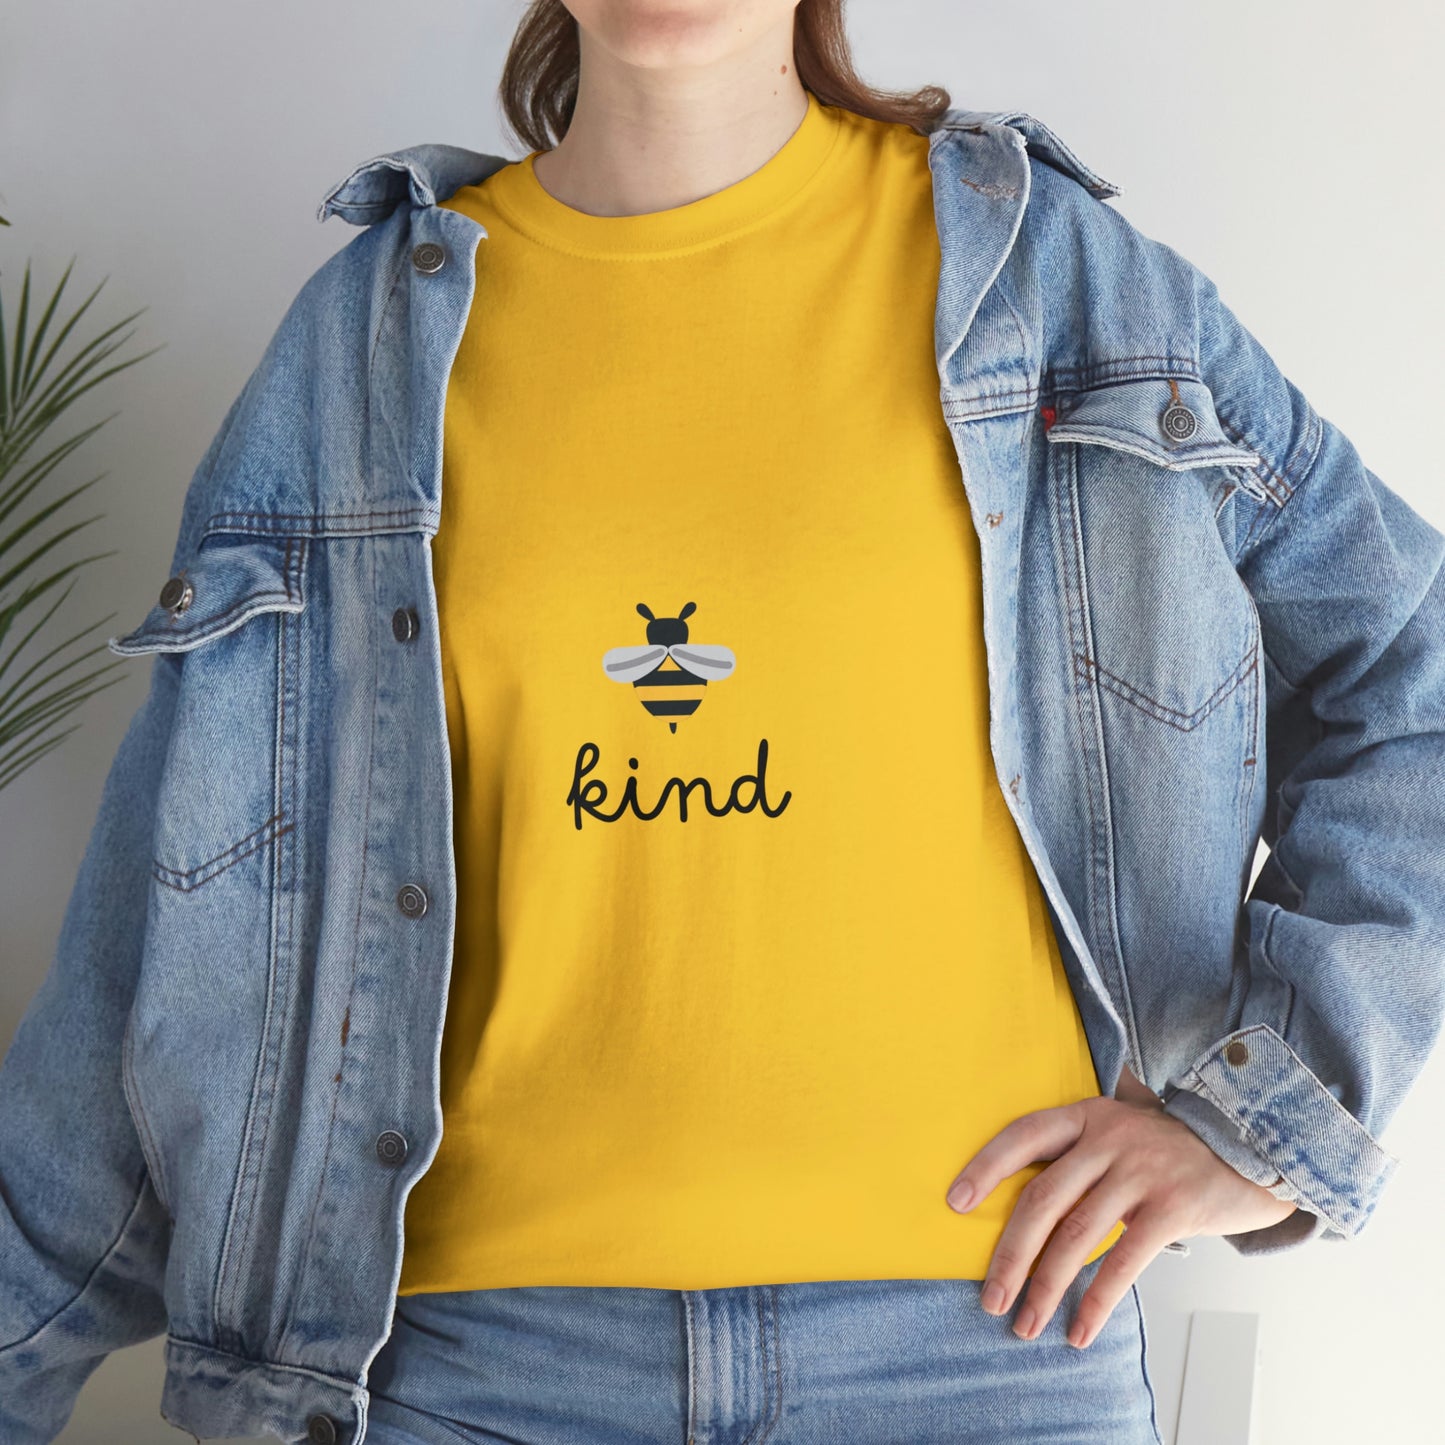 Bee kind Your Style Our Custom Printed Tee Unique Design Comfortable Fit Personalized for You color, funny tshirt tee shirt motivation